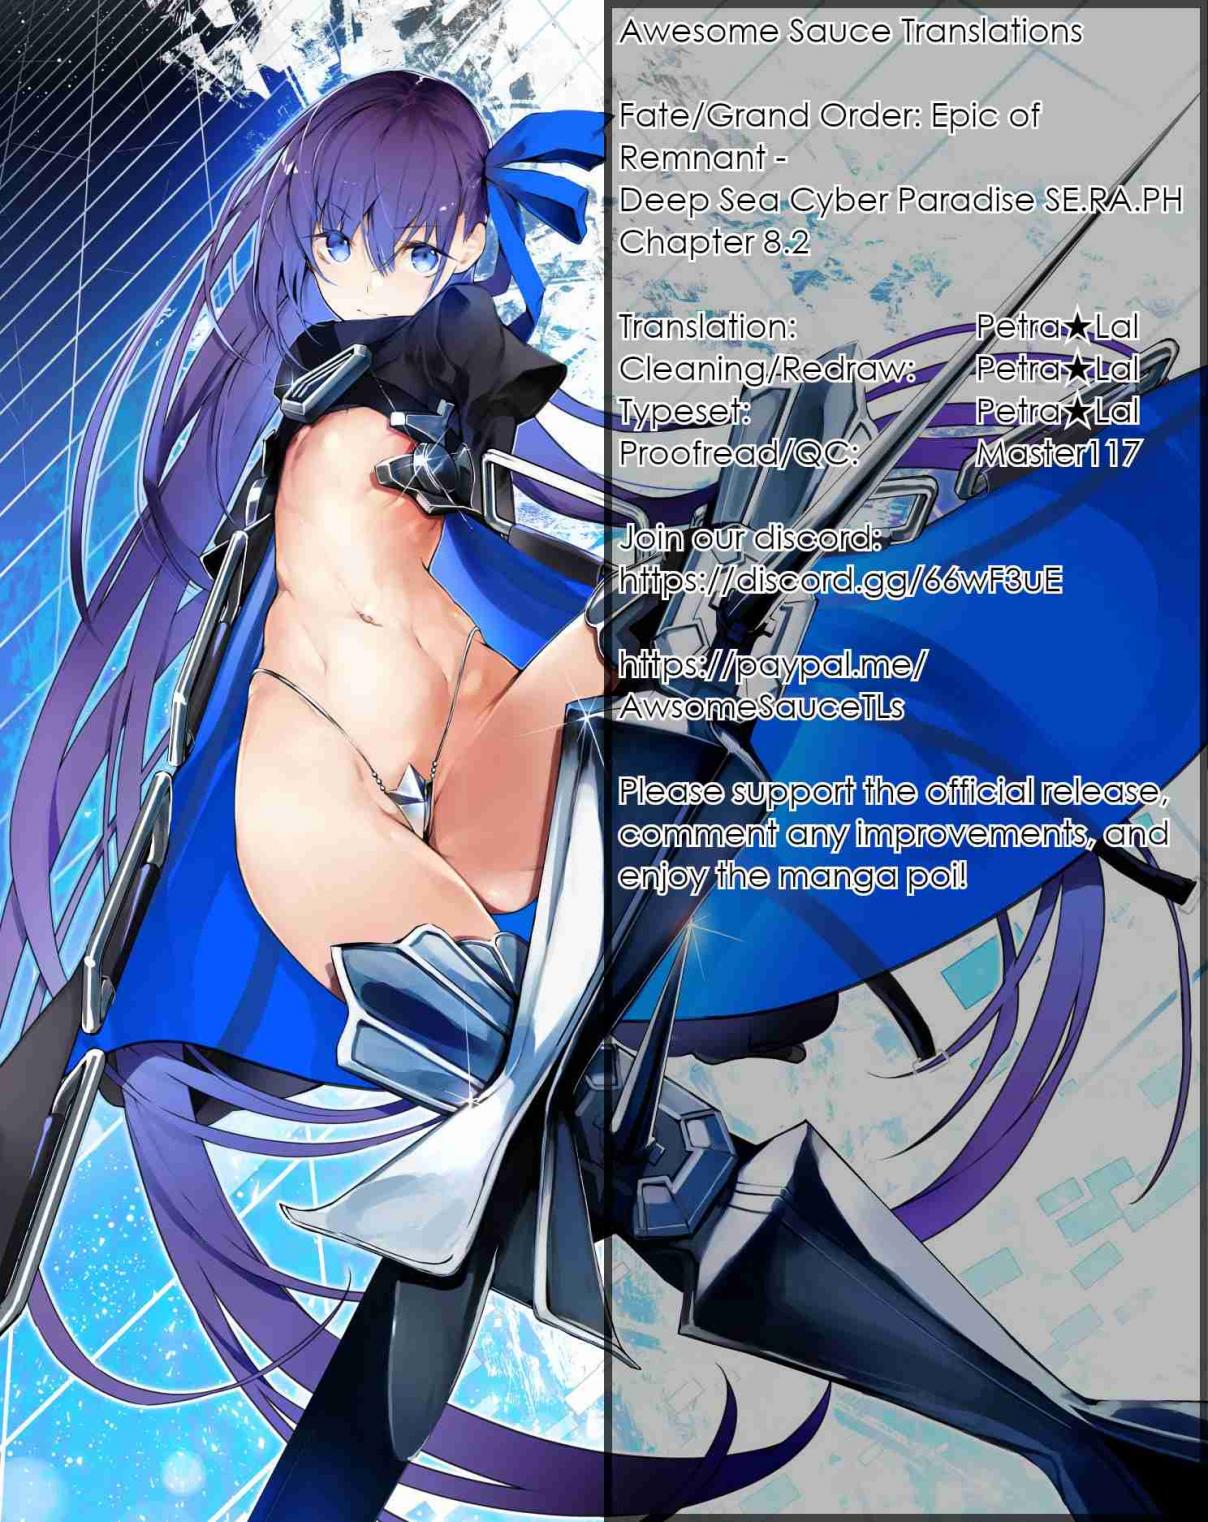 Fate/Grand Order -Epic of Remnant- Deep Sea Cyber-Paradise, SE.RA.PH 8.2